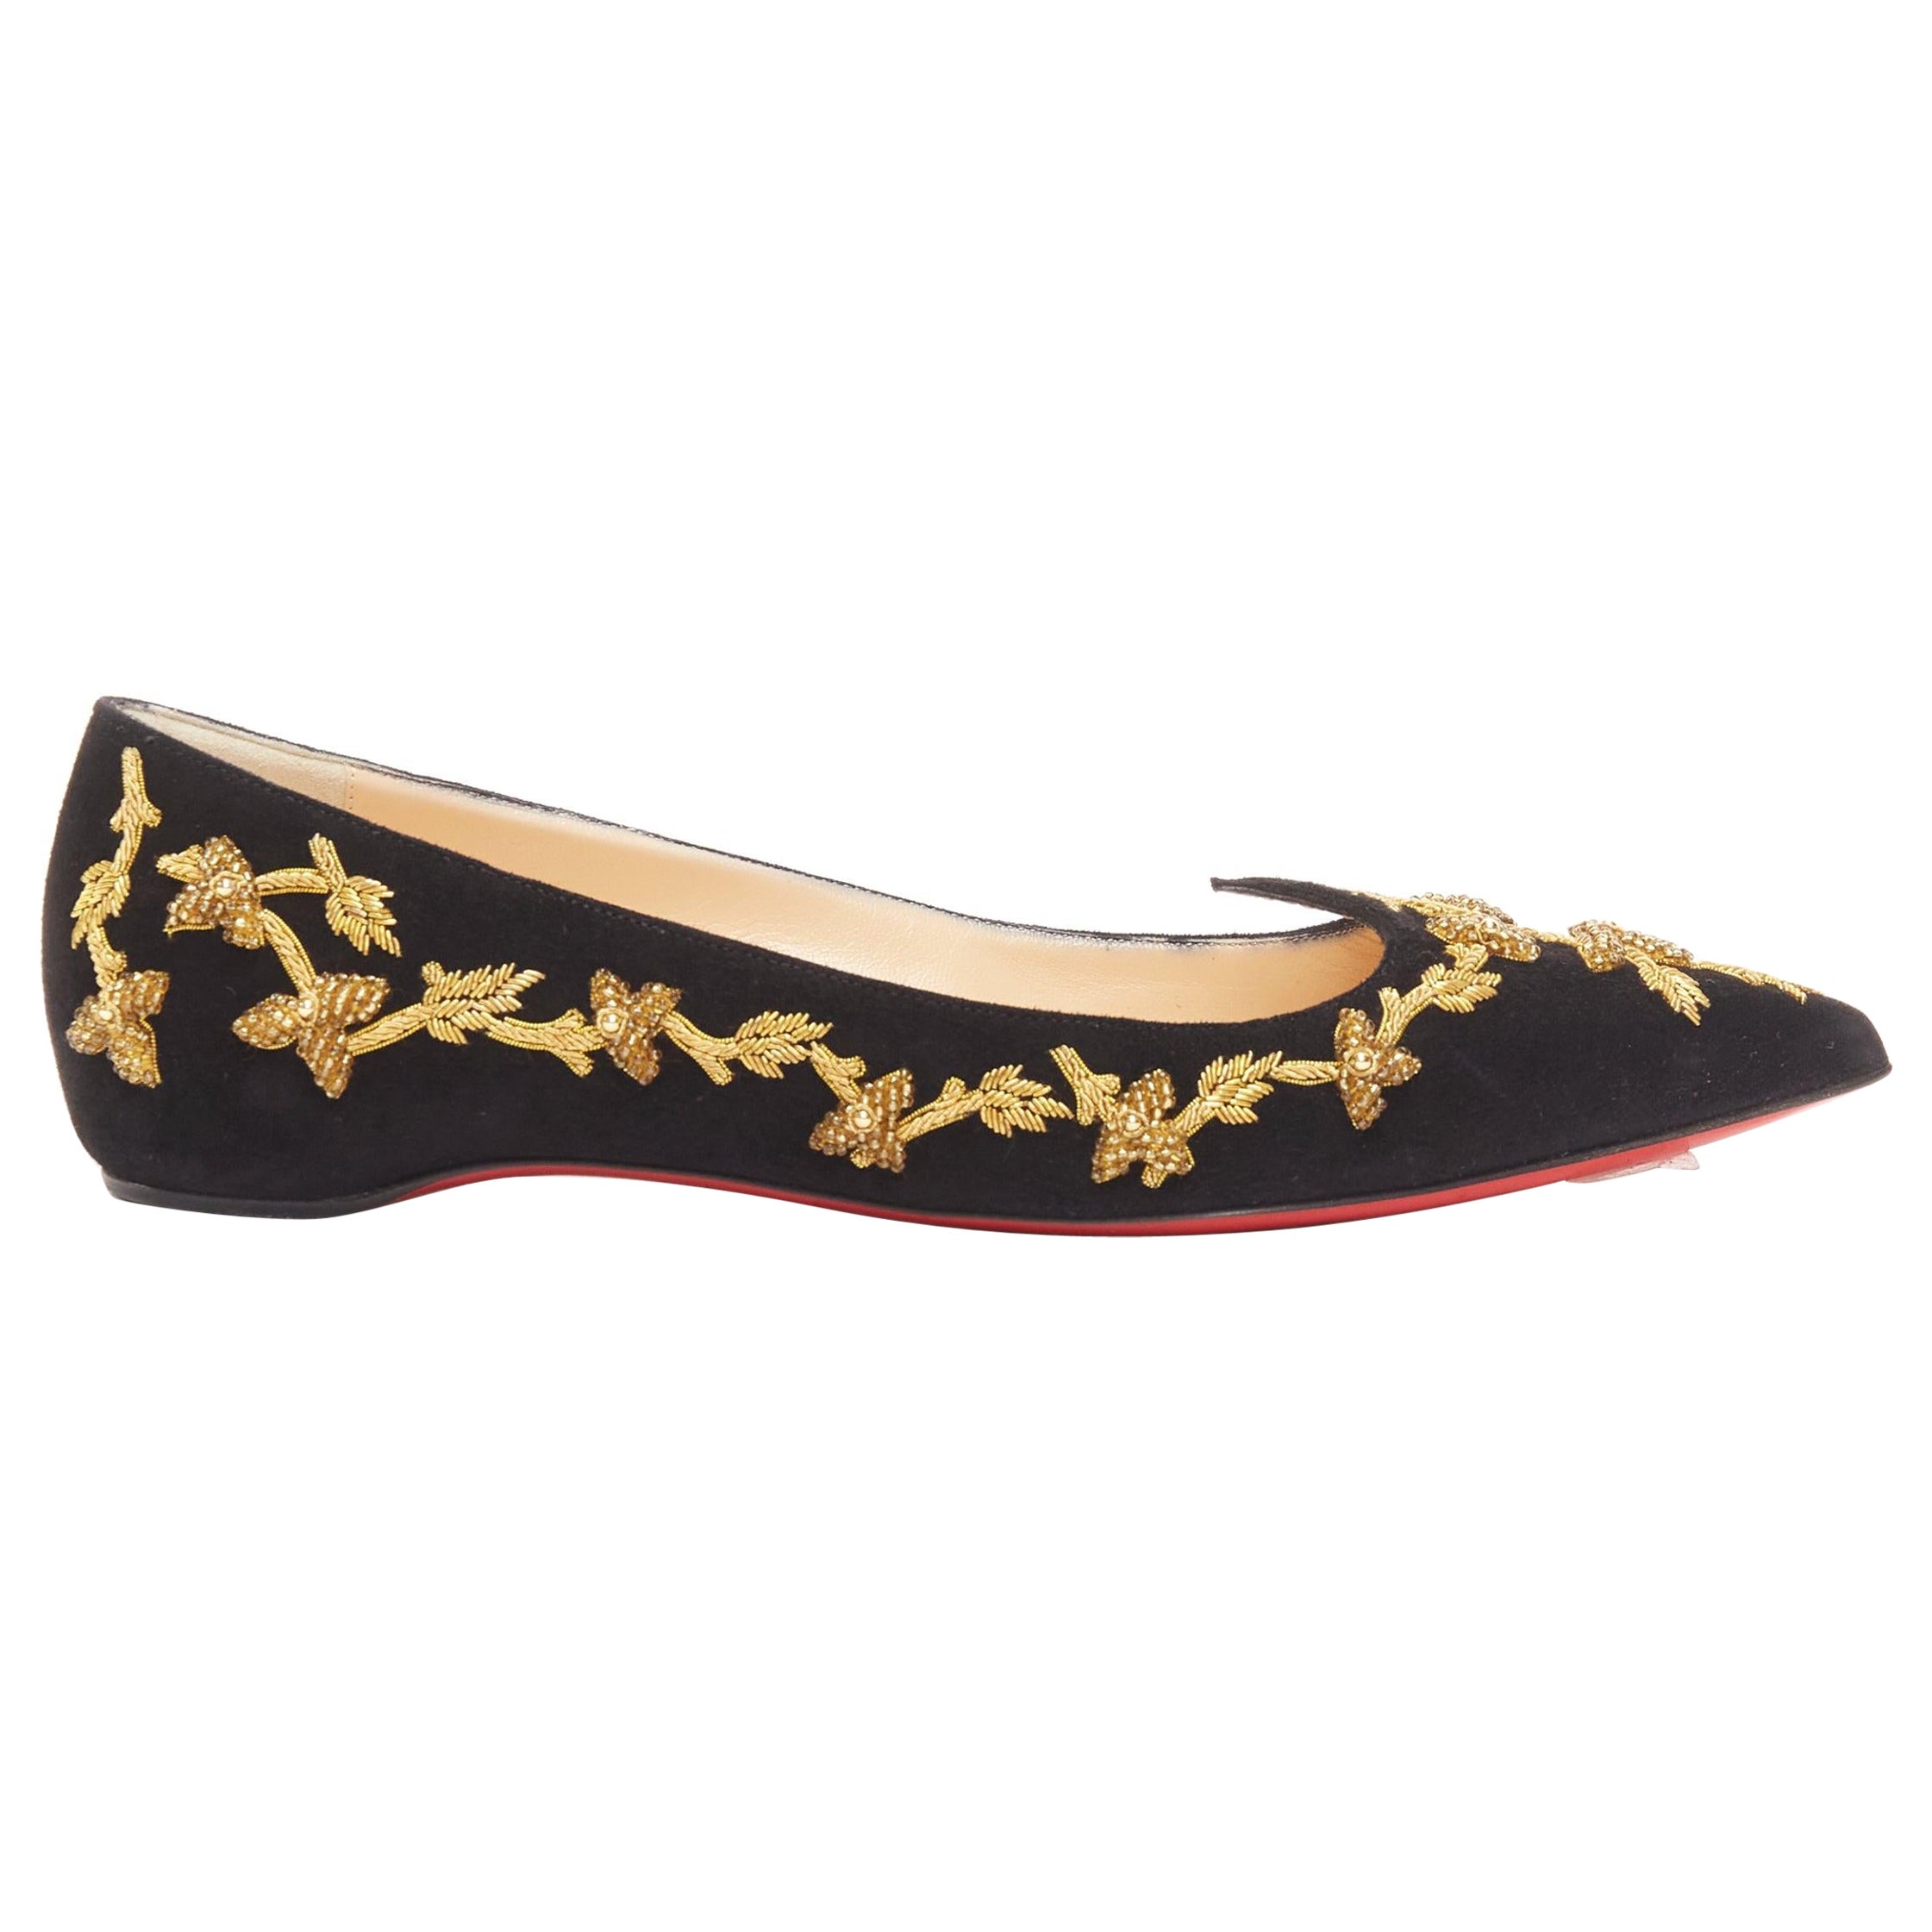 CHRISTIAN LOUBOUTIN black gold embroidery suede leather pointy flats EU35.5 For Sale